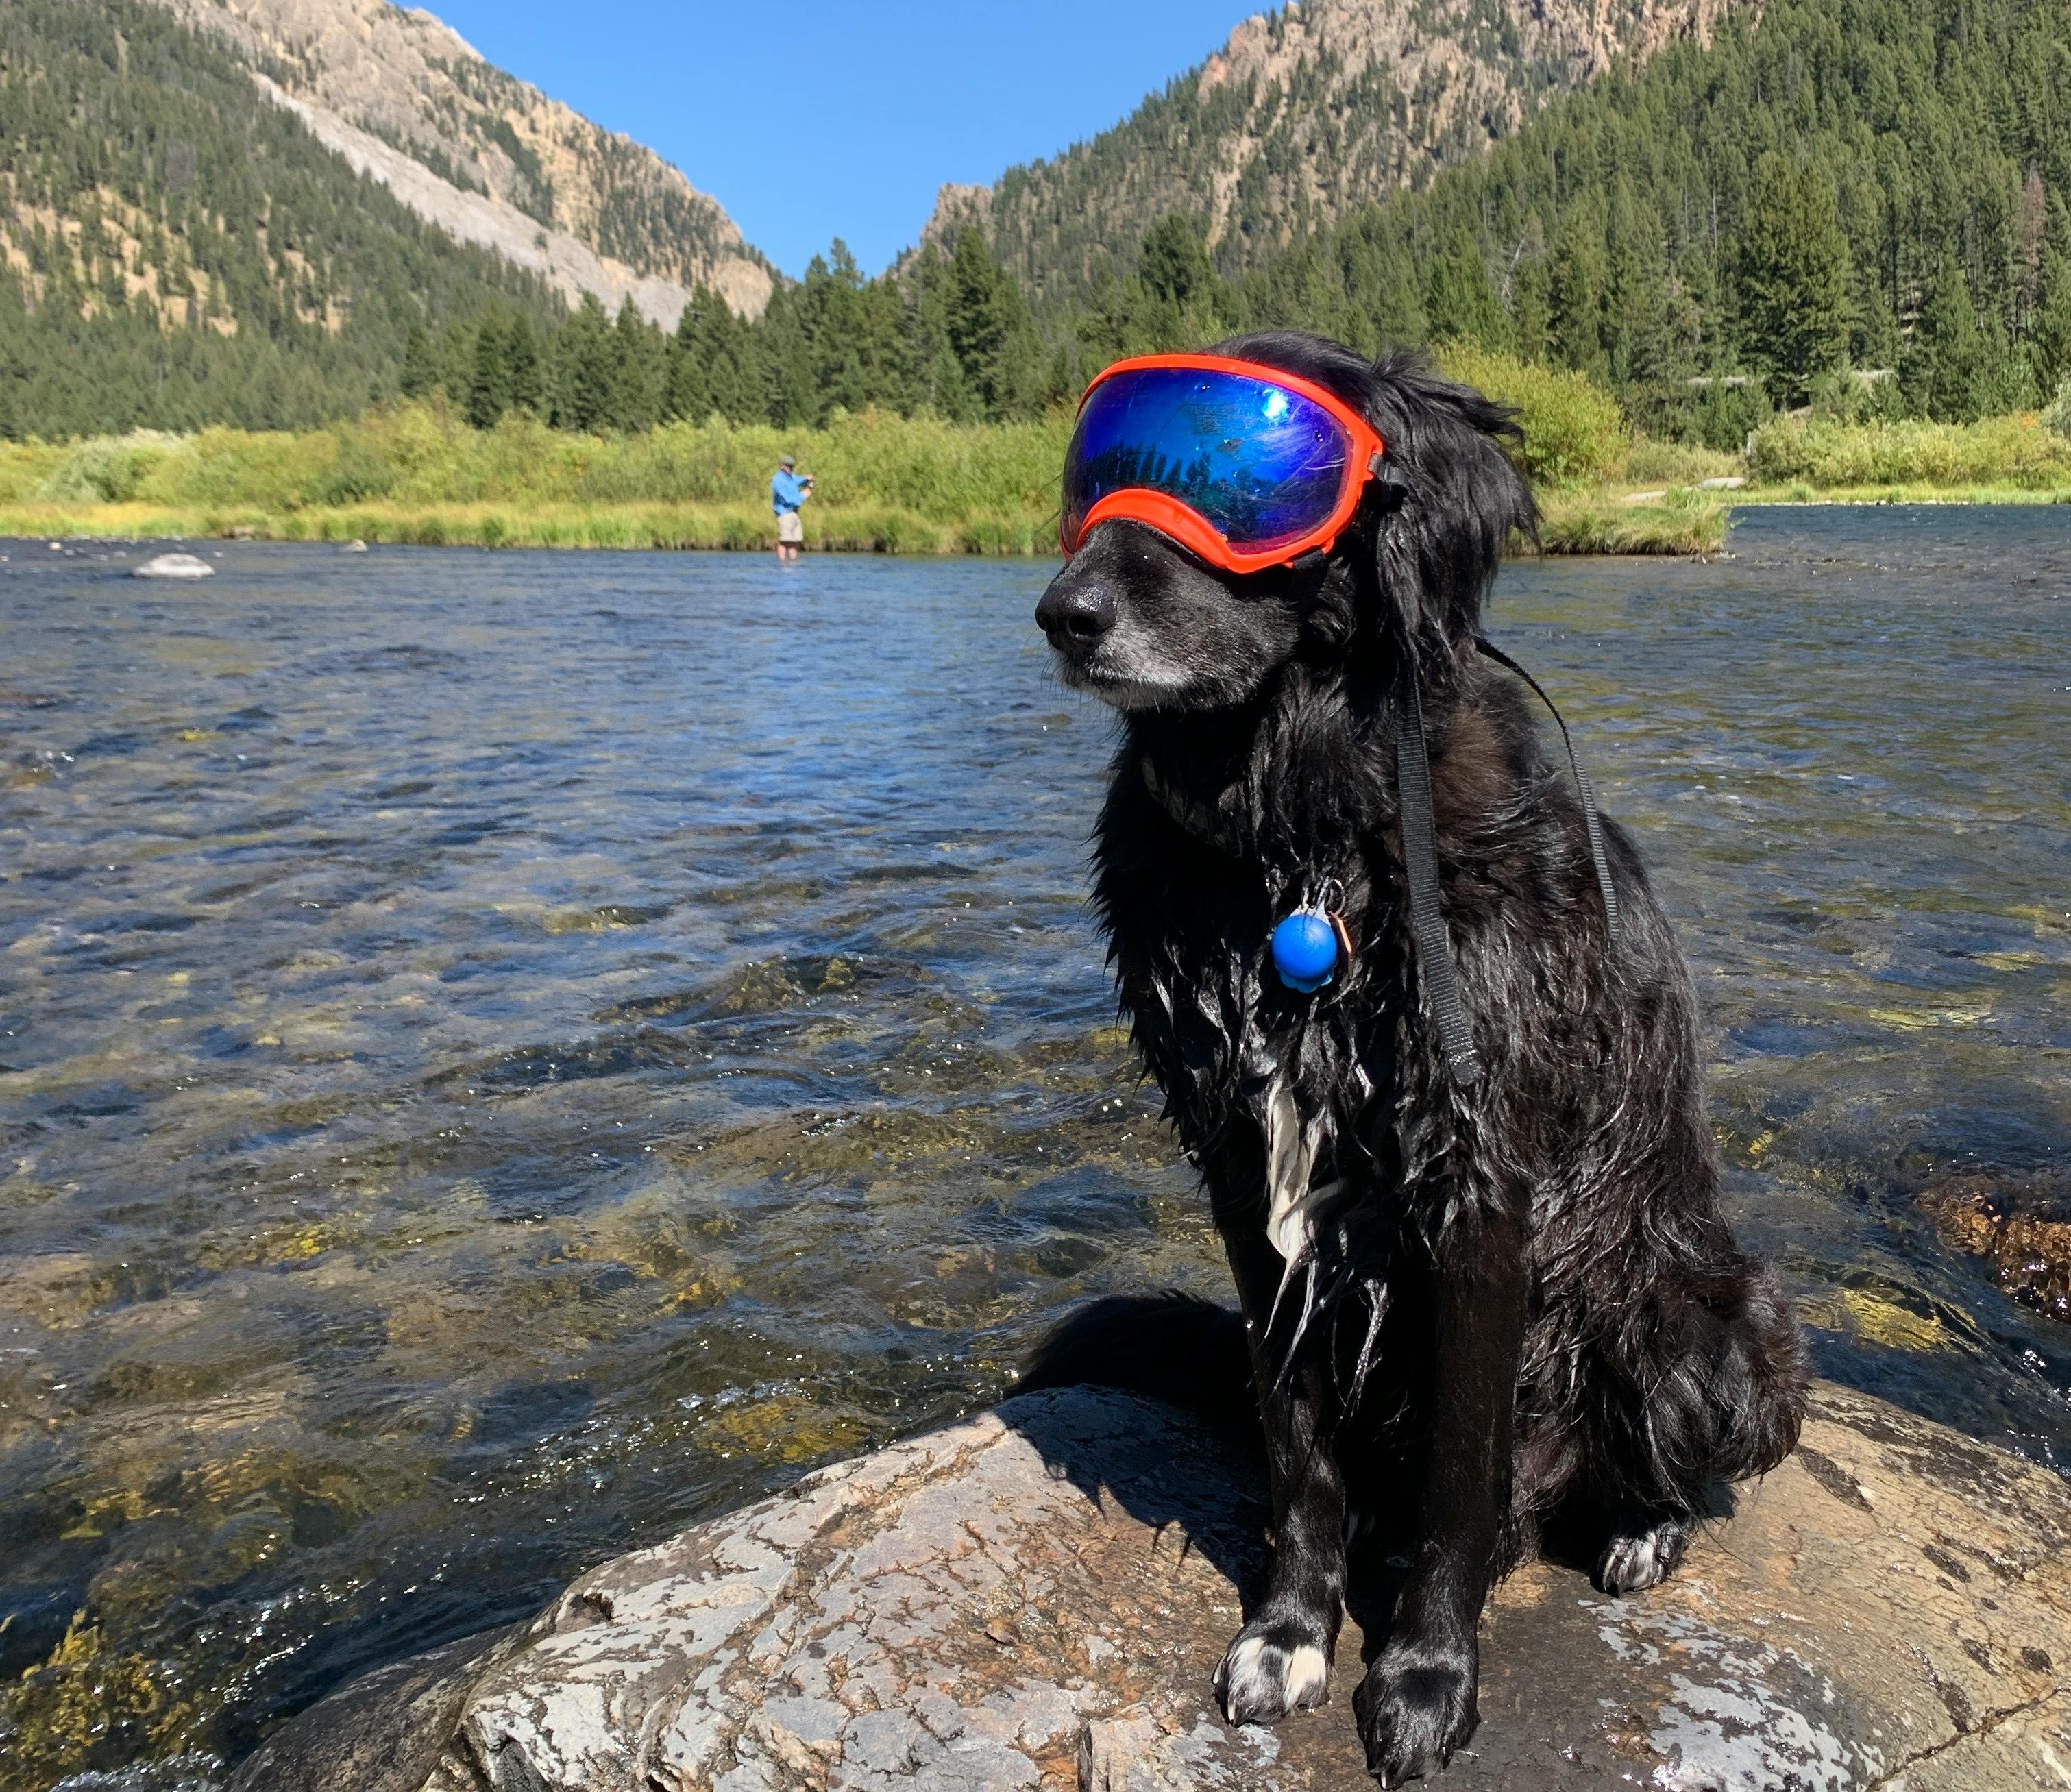 A wet, black dog sits on a rock near a river. There are mountains in the background and the dog is wearing goggles. 